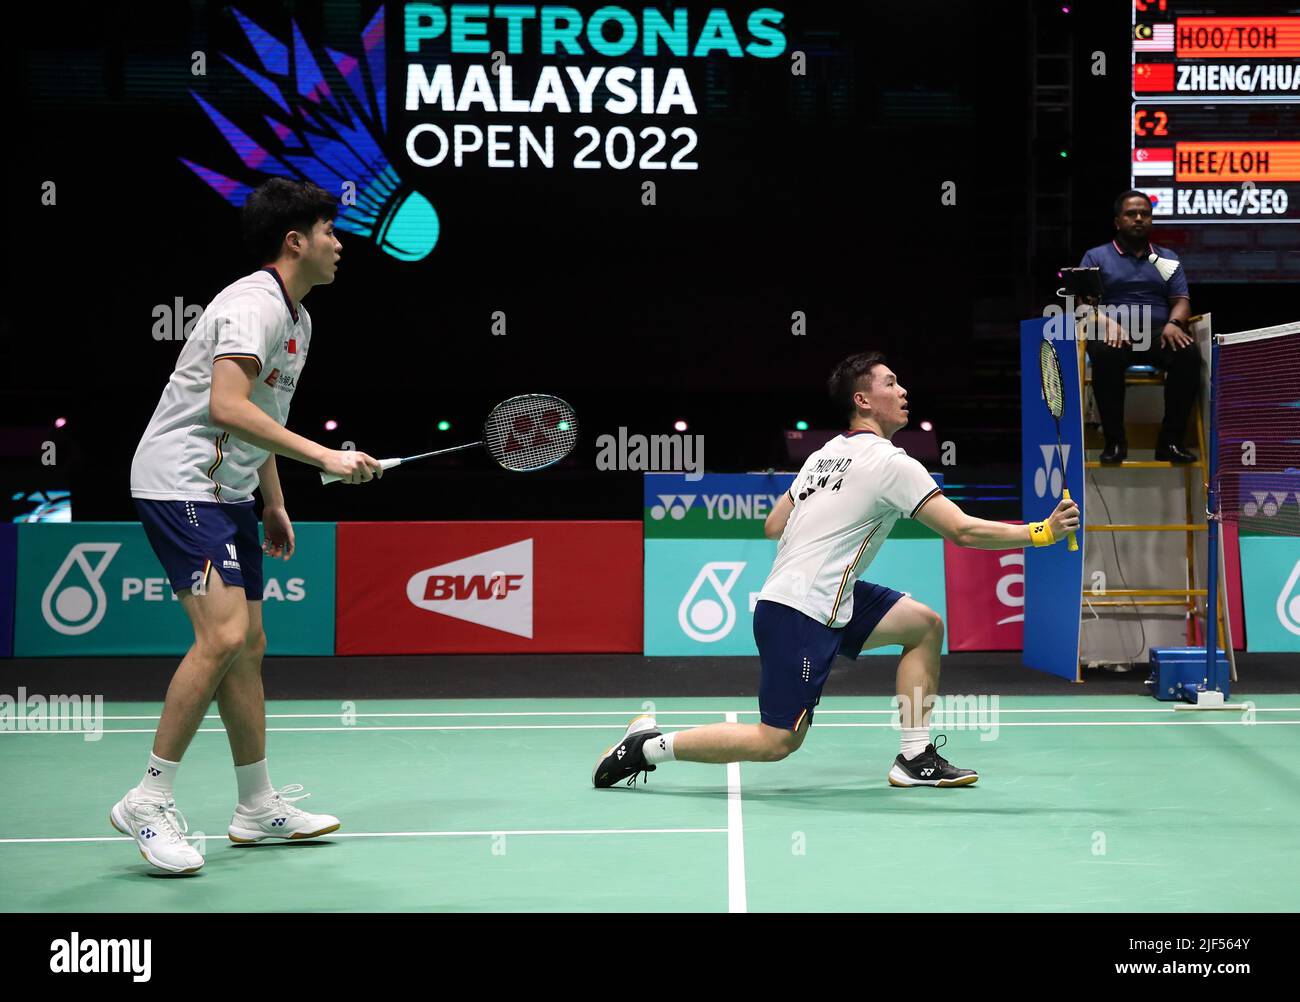 Kuala Lumpur, Malaysia. 29th June, 2022. He Ji Ting and Zhou Hao Dong of China play against Boon Xin Yuan and Wong Tien CI of Malaysia during the Men's Doubles round one match of the Petronas Malaysia Open 2022 at Axiata Arena, Bukit Jalil. Credit: SOPA Images Limited/Alamy Live News Stock Photo